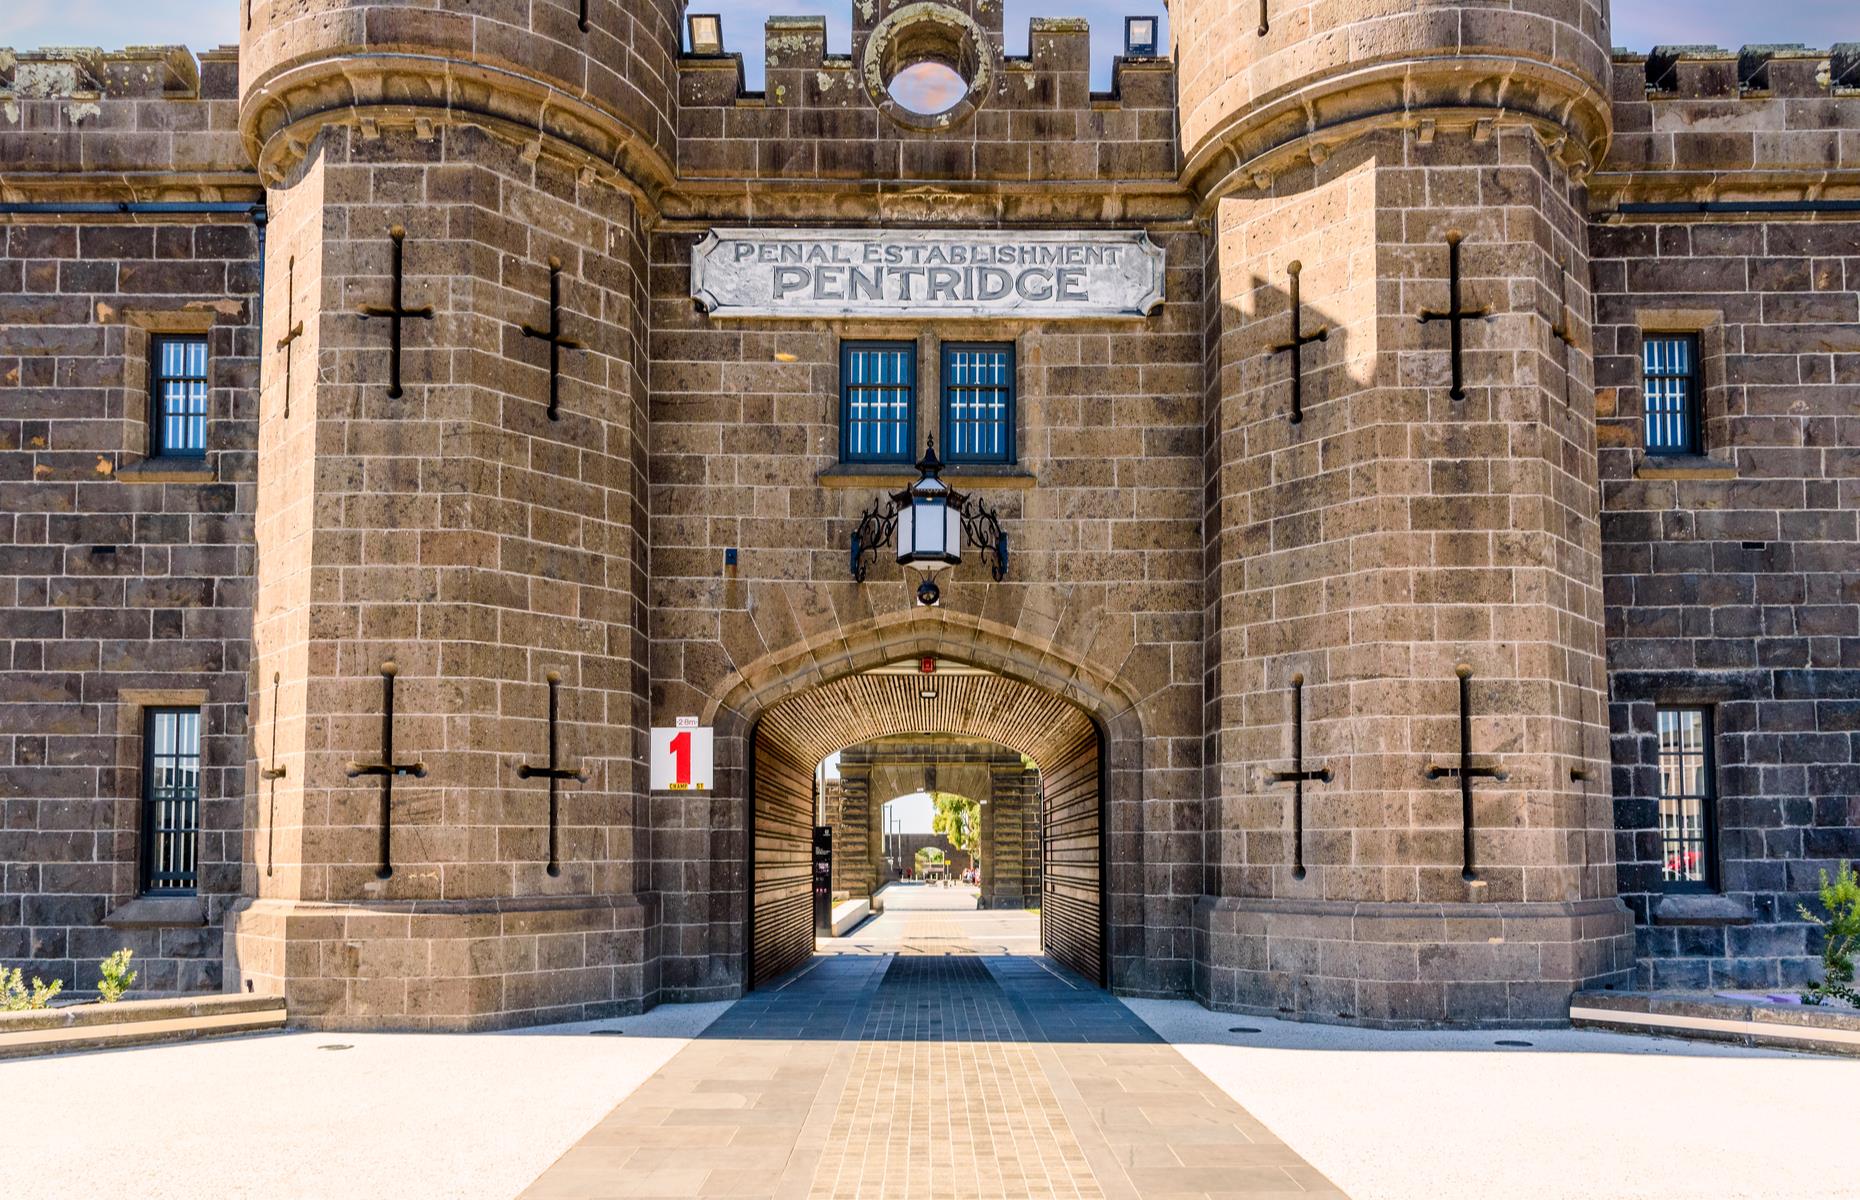 <p>Having opened its doors to the public in 2020, <a href="https://pentridgecoburg.com.au/our-story">this heritage-listed former state prison</a> was established in 1851 and became the main remand and reception prison for Melbourne after Melbourne Gaol closed in the 1920s. Pentridge housed many notorious criminals until its closure in 1997. The derelict site was abandoned until 2013, when it was bought and restoration and redevelopment began. Visitors can explore the former prison’s A and B Division, plus the notorious H Division, once reserved for the toughest criminals.</p>